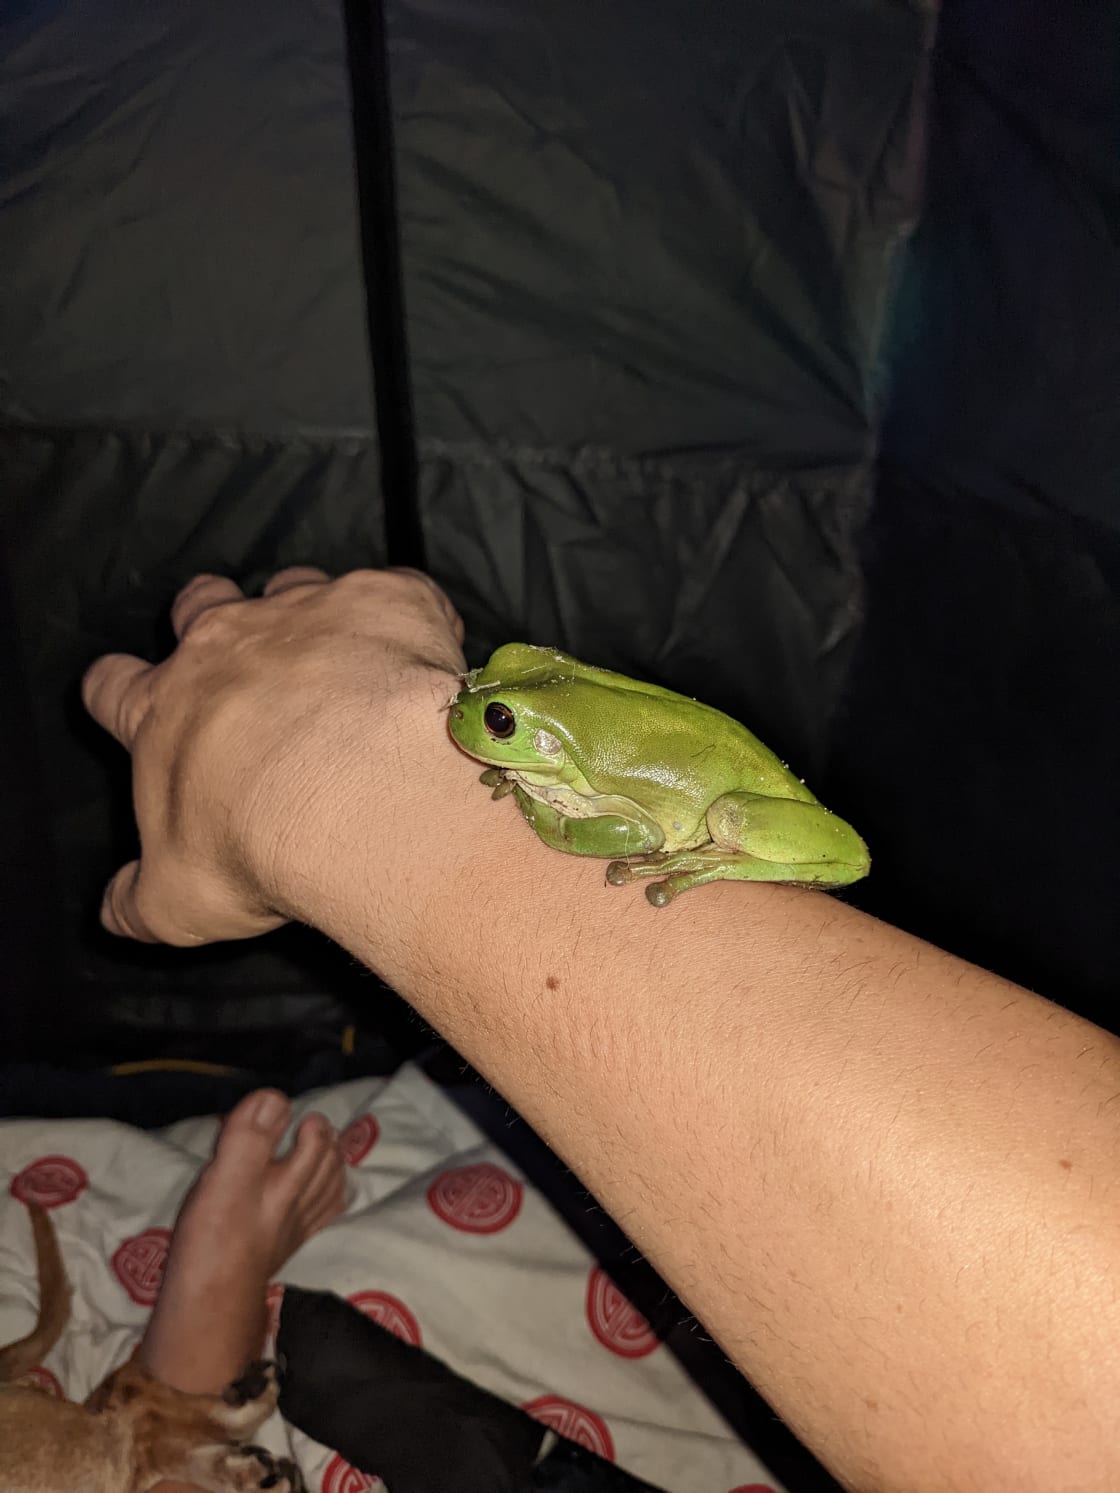 Cute little green tree frog that hopped on my arm!